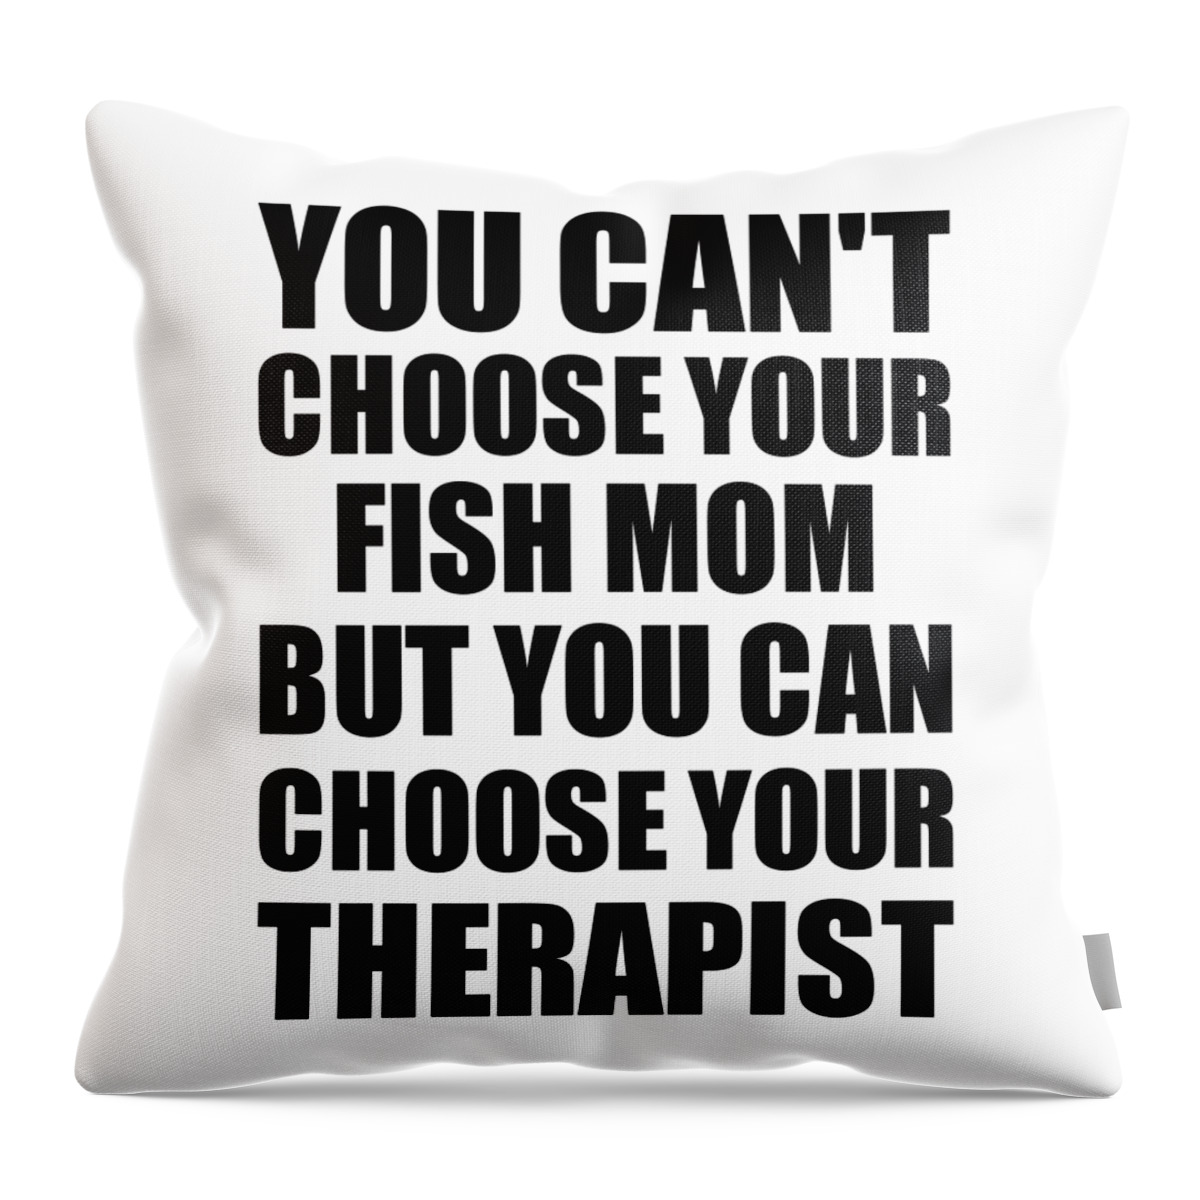 Fish Mom You Can't Choose Your Fish Mom But Therapist Funny Gift Idea  Hilarious Witty Gag Joke Throw Pillow by Jeff Creation - Fine Art America